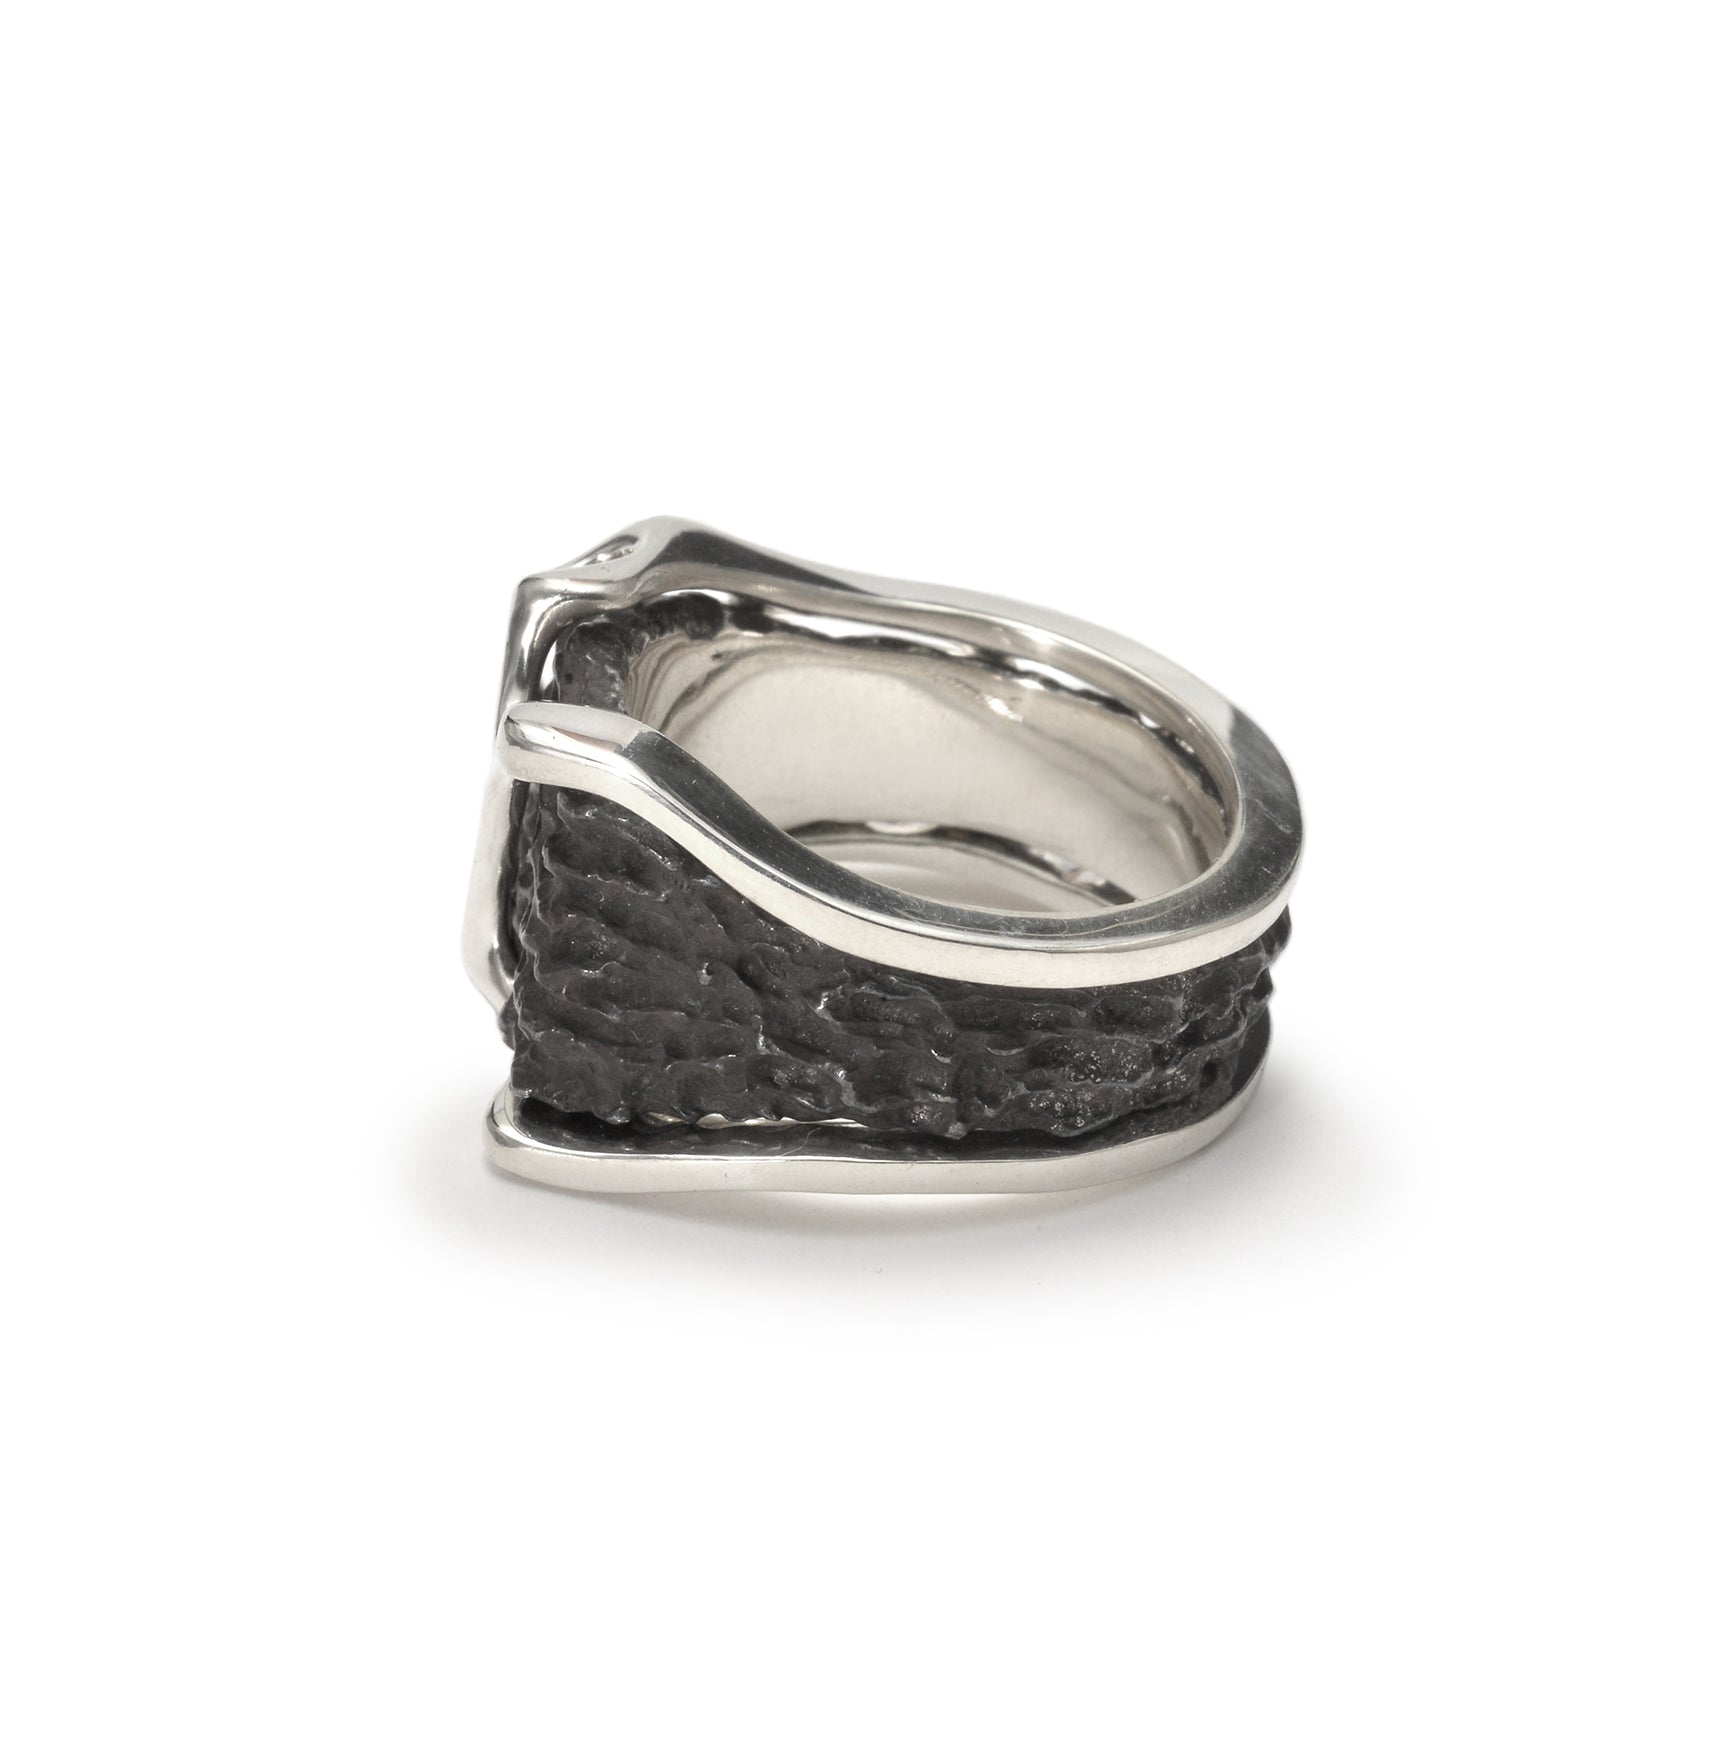 fusion - Square sterling silver combination signet ring